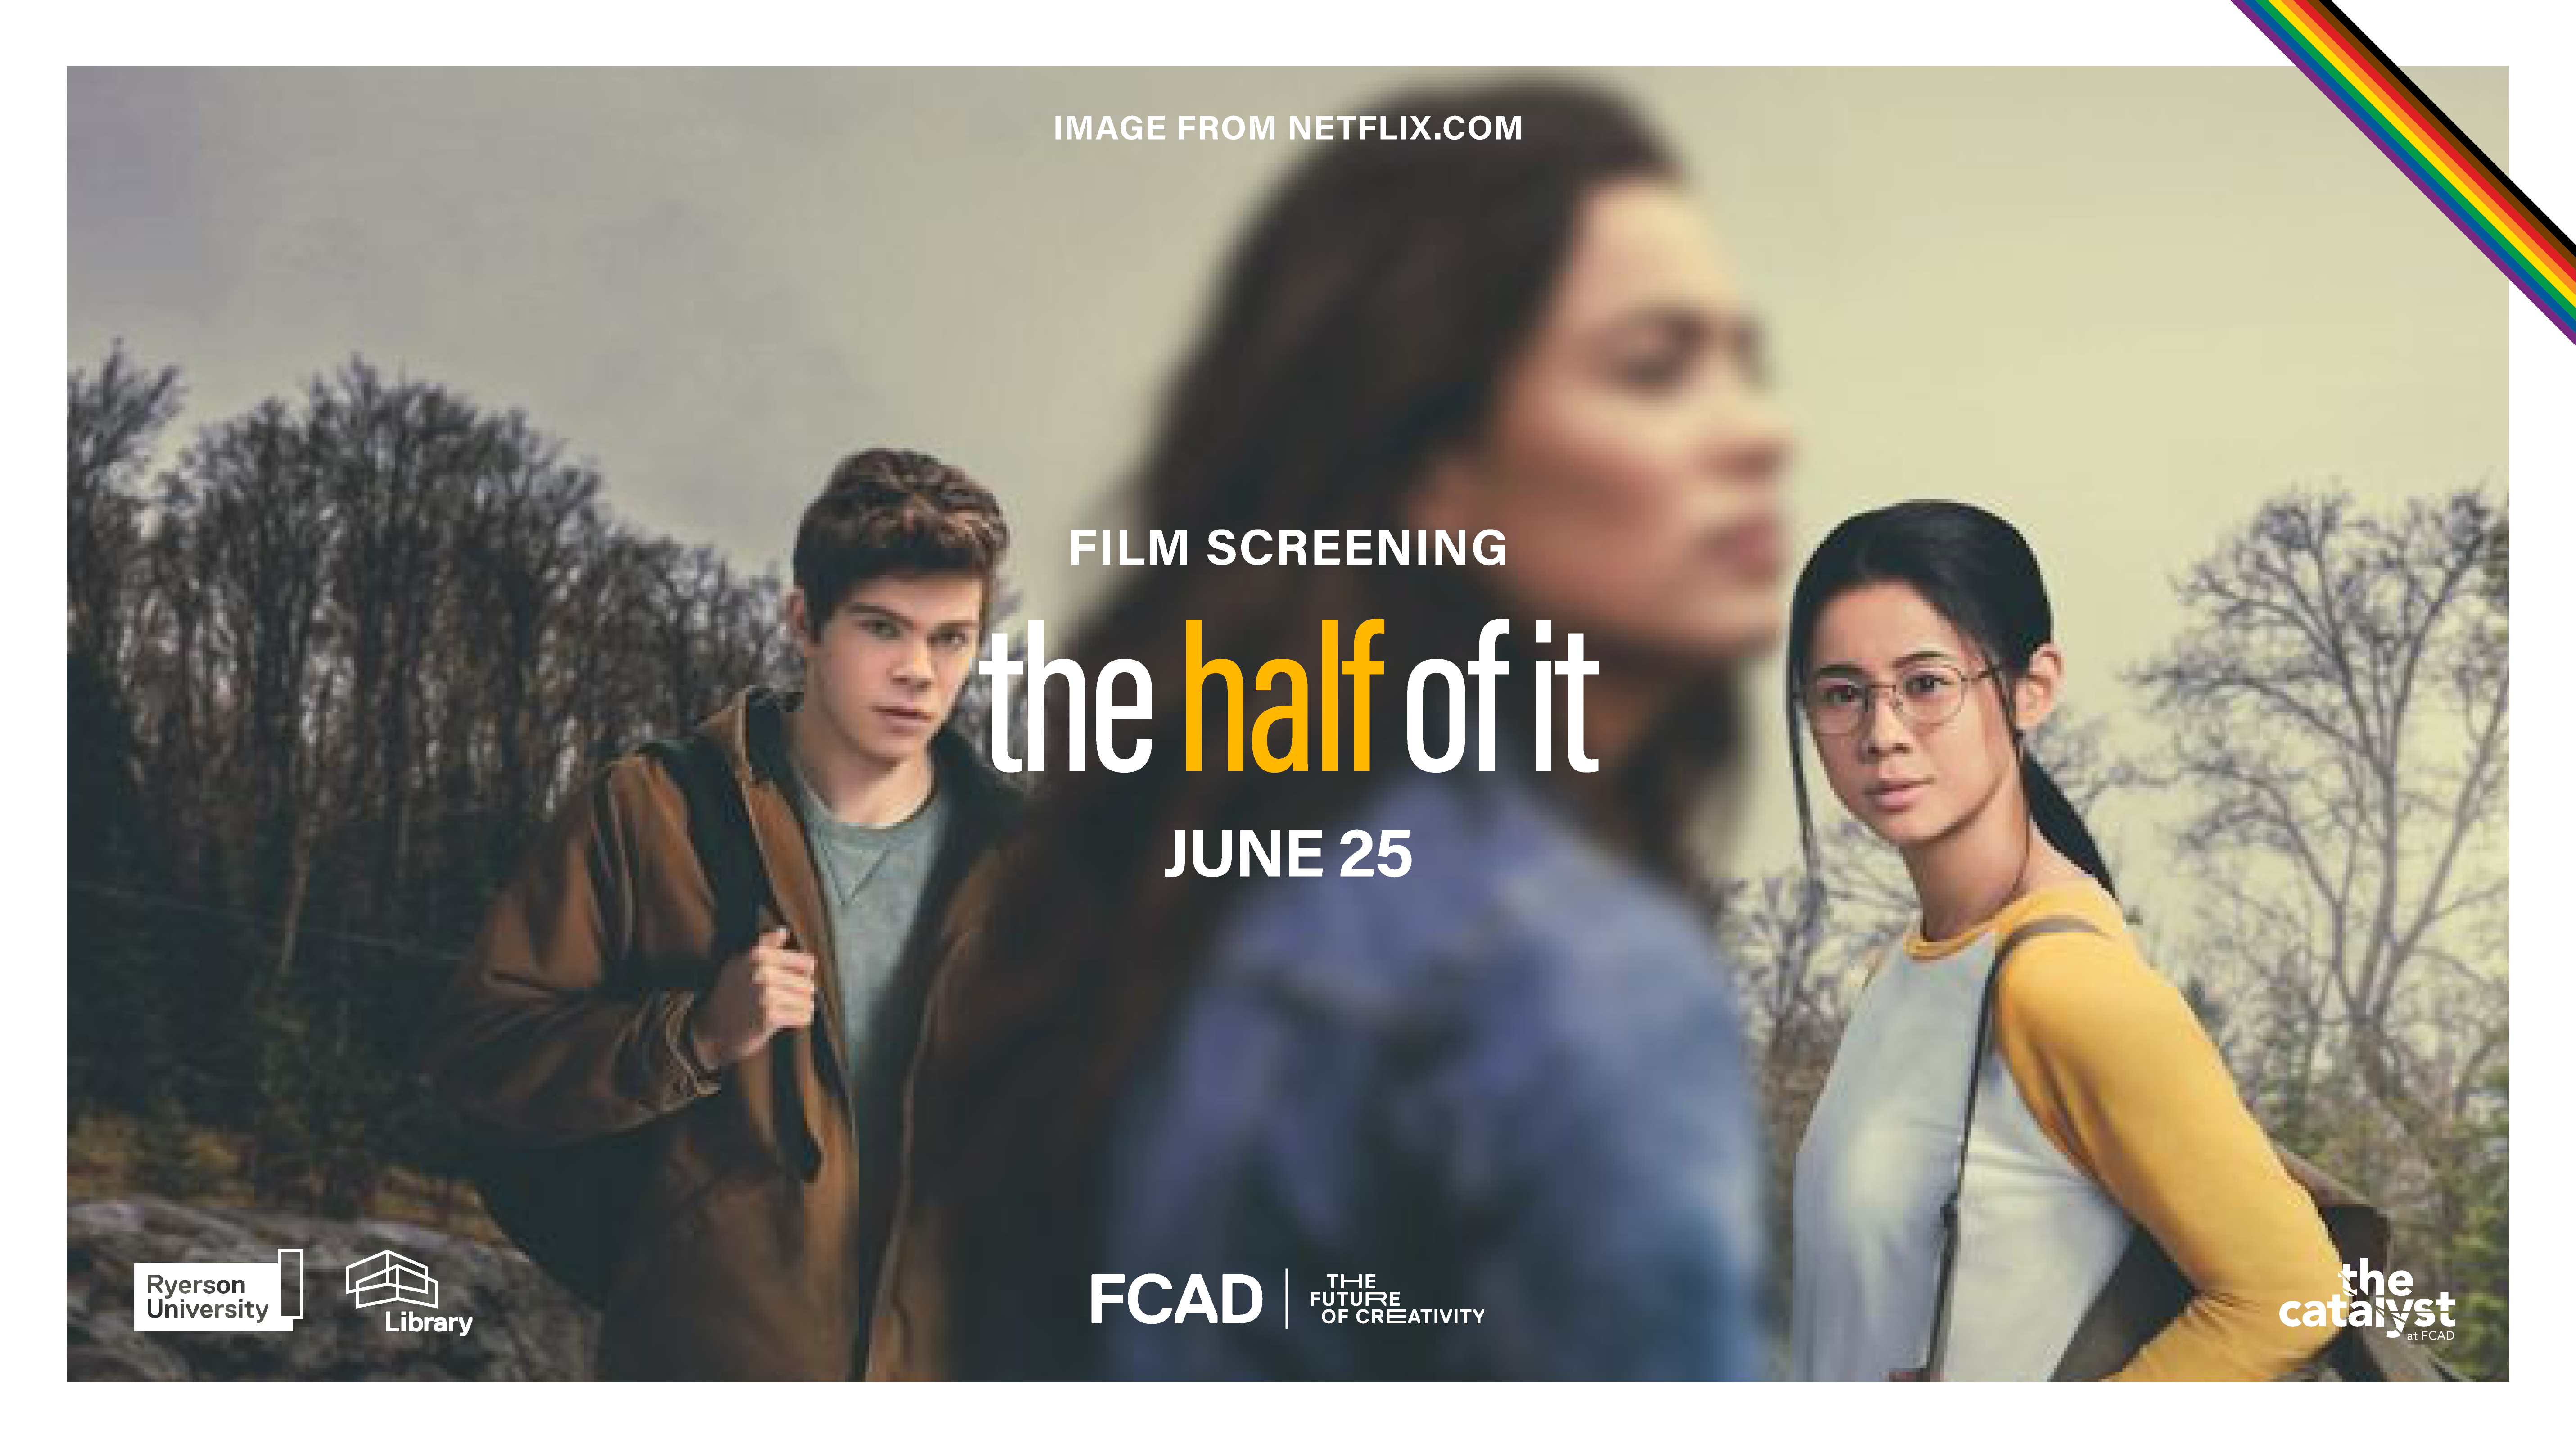 Movie poster for Netflix's "The Half Of It"